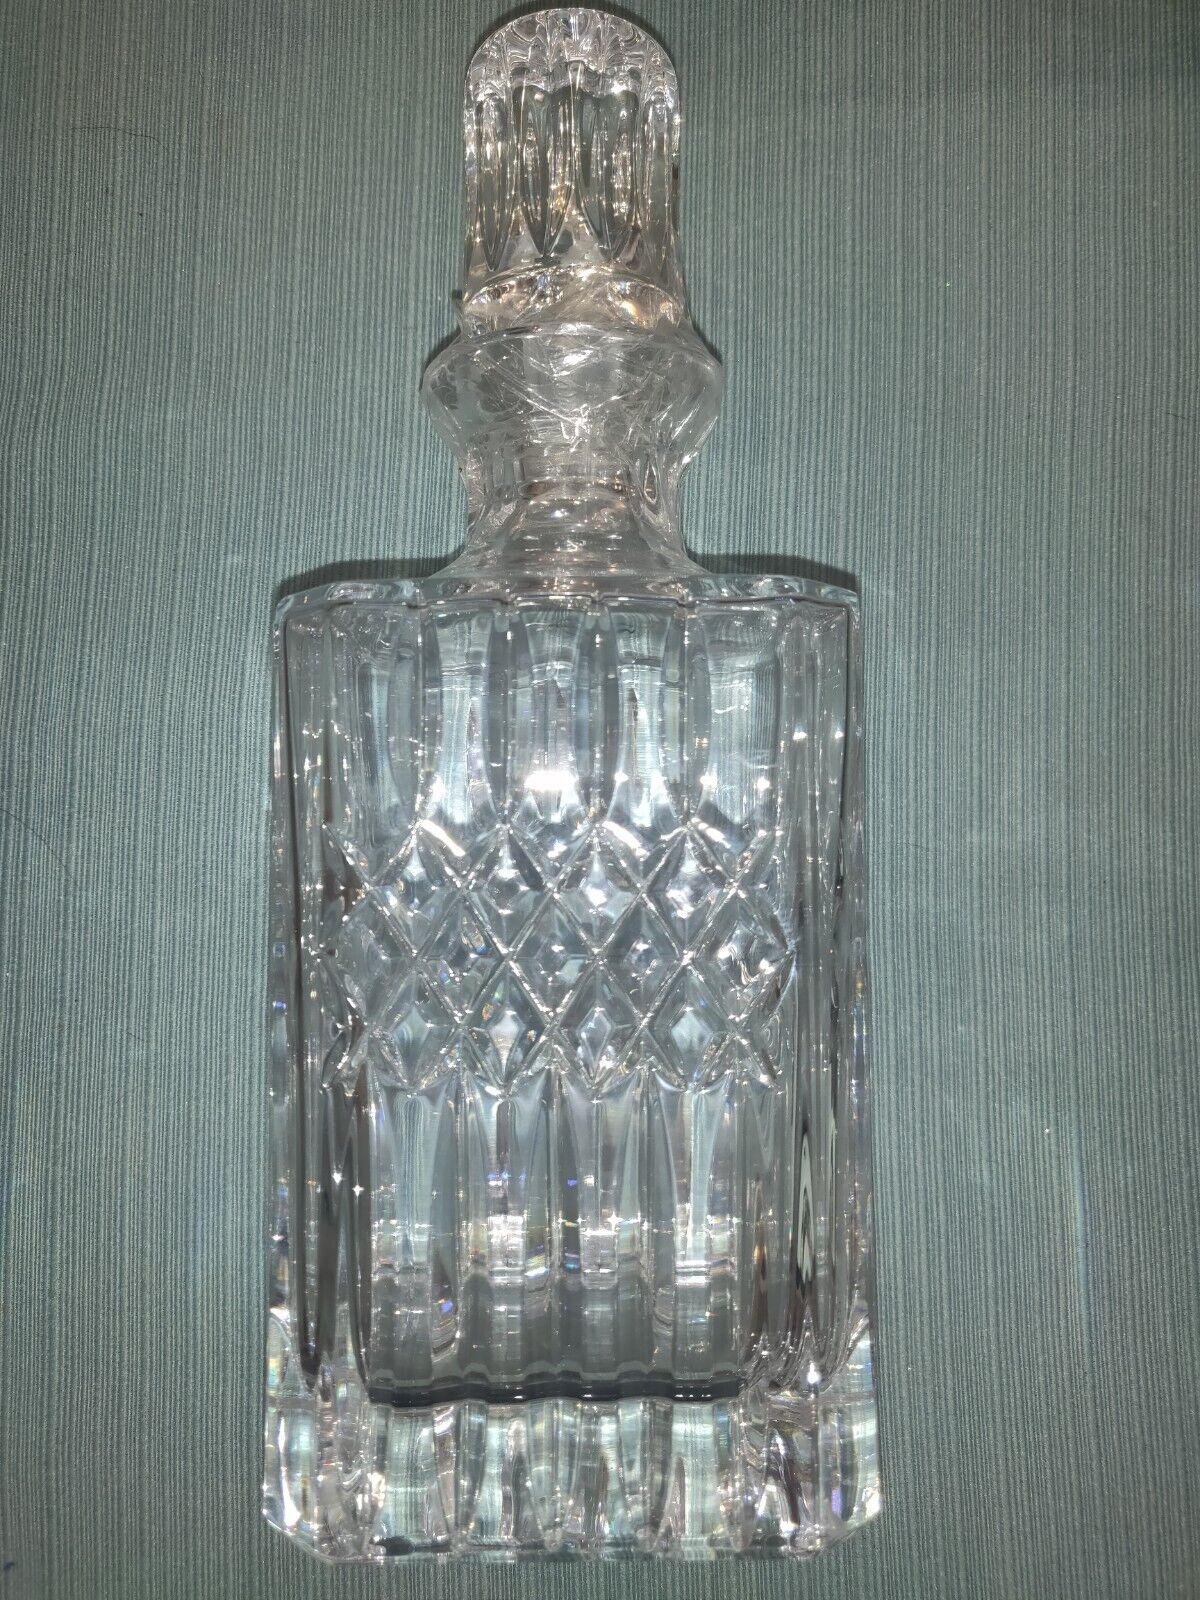 Wedgwood Germany WWC4 Full Lead Crystal Glass Decanter Bottle With Stopper 